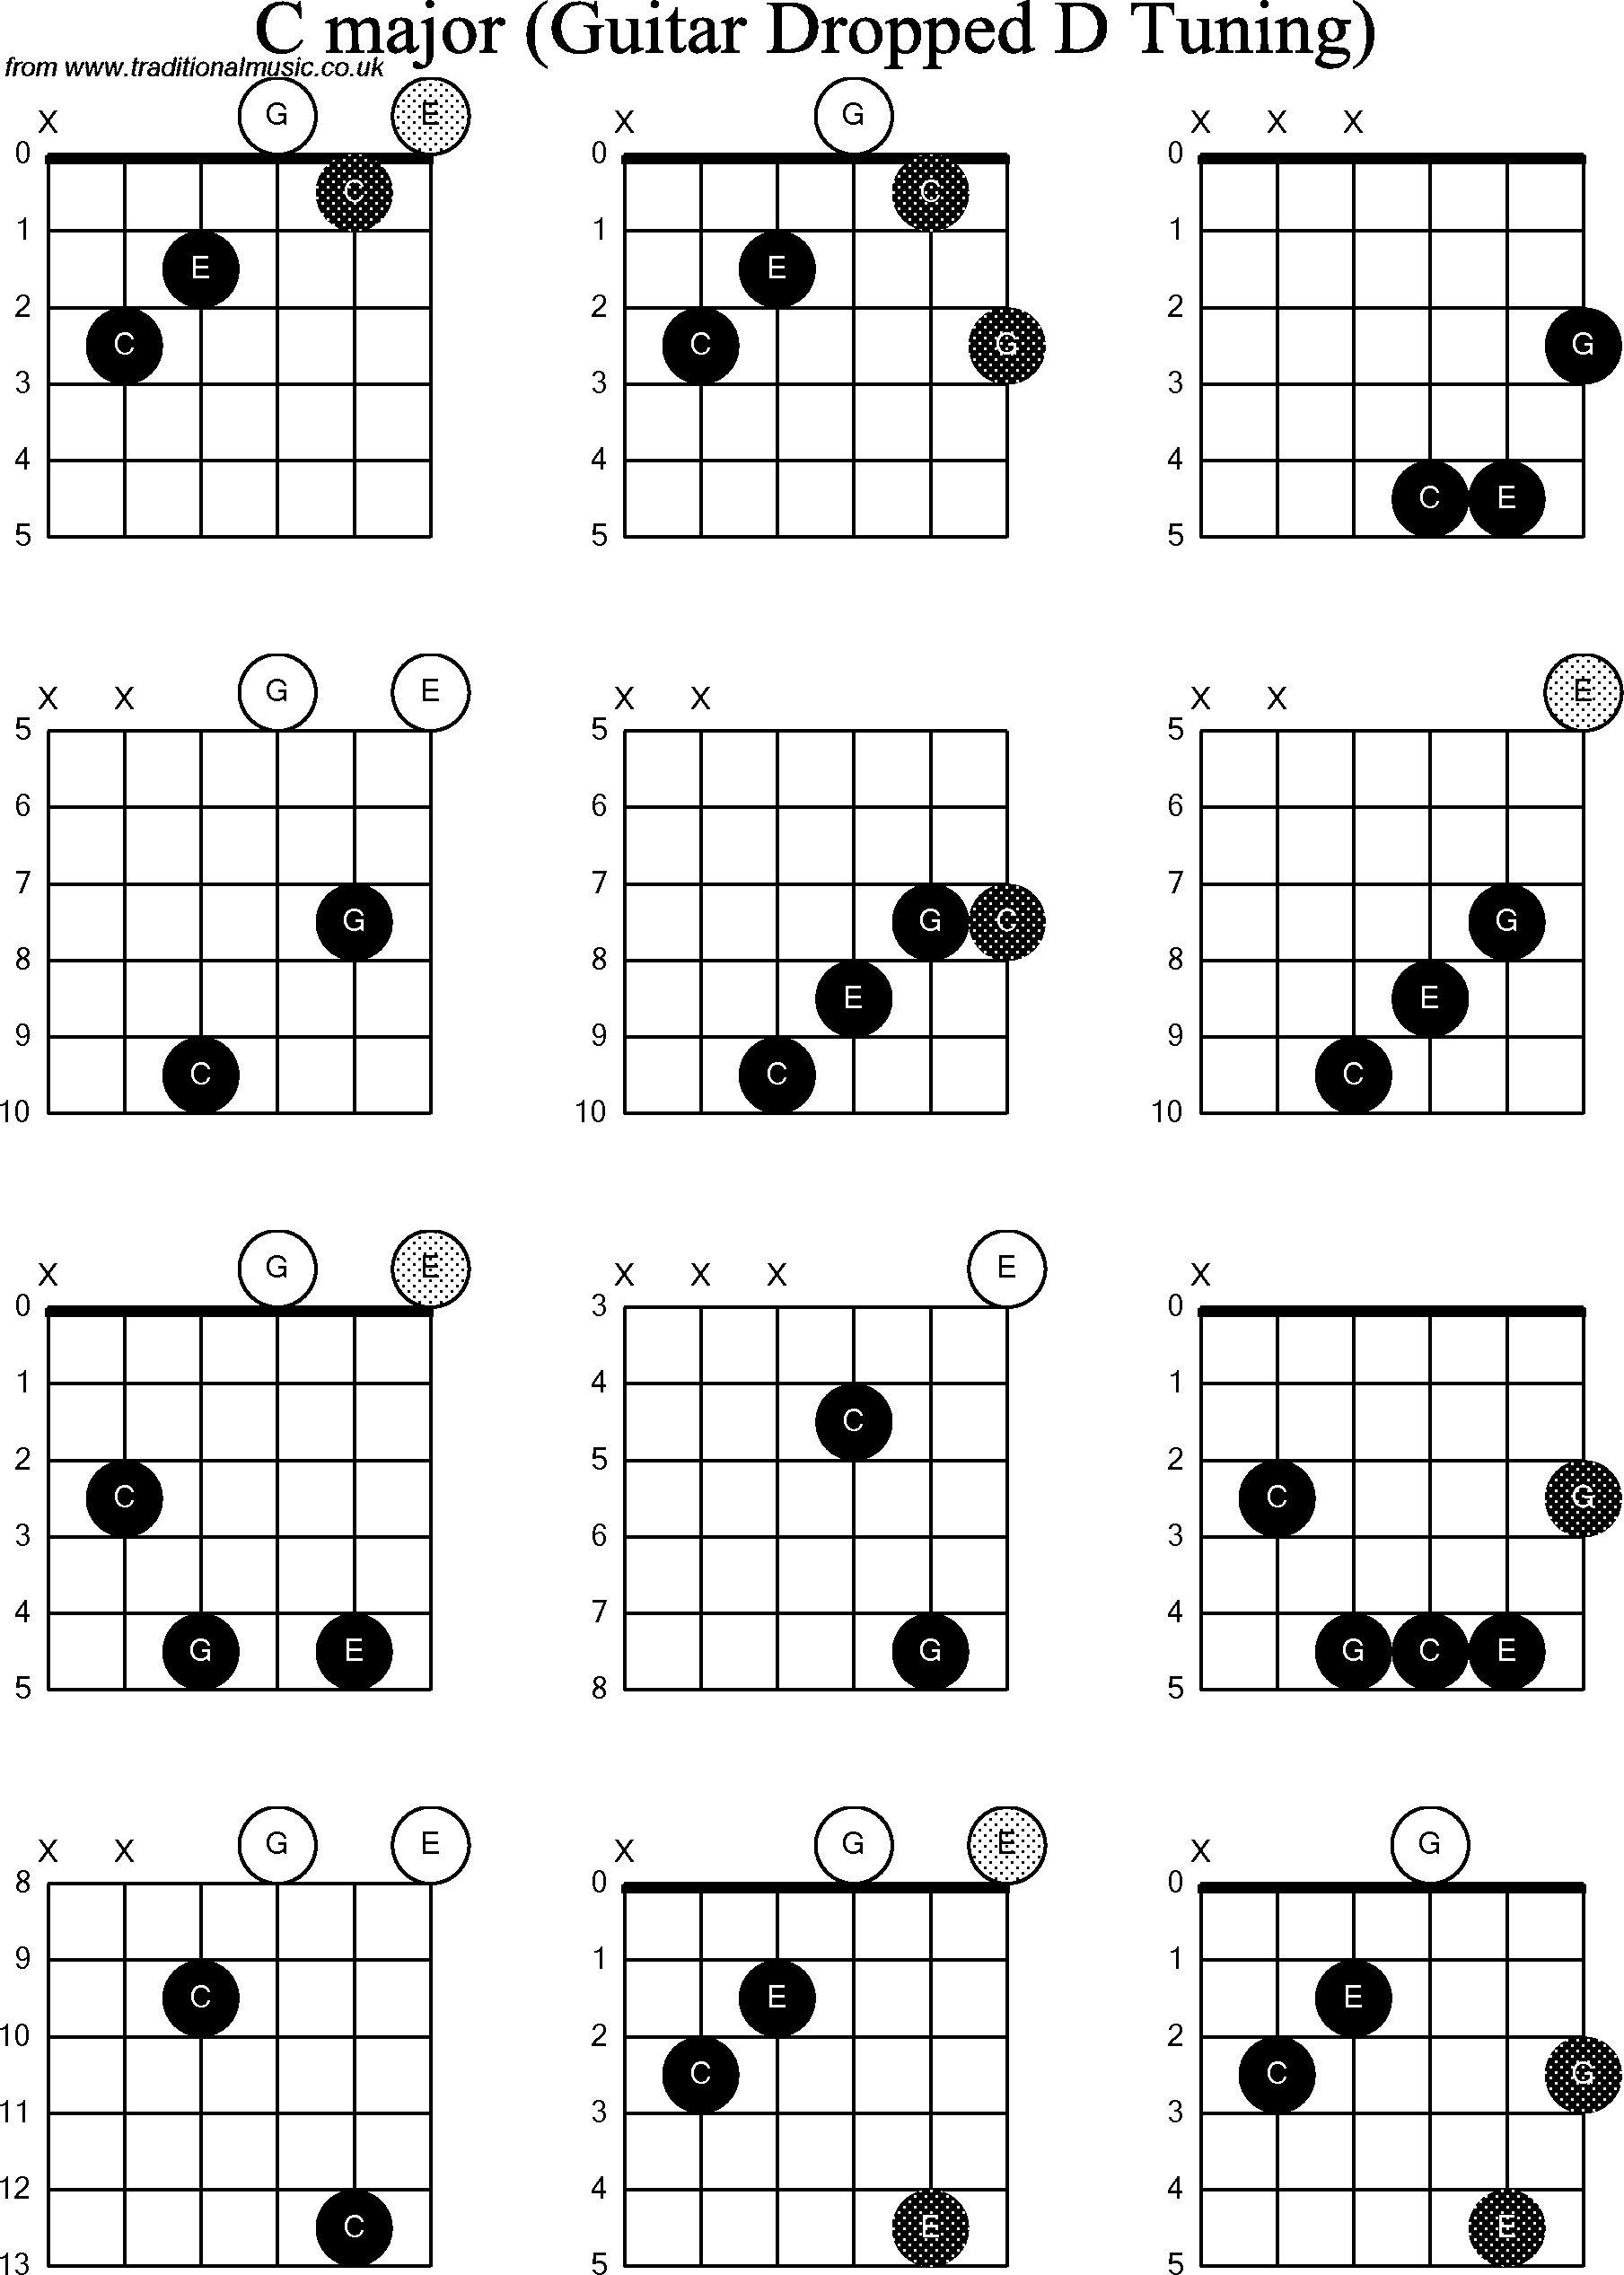 Chord Diagrams For Dropped D Guitardadgbe C Major Th Free Hot Nude